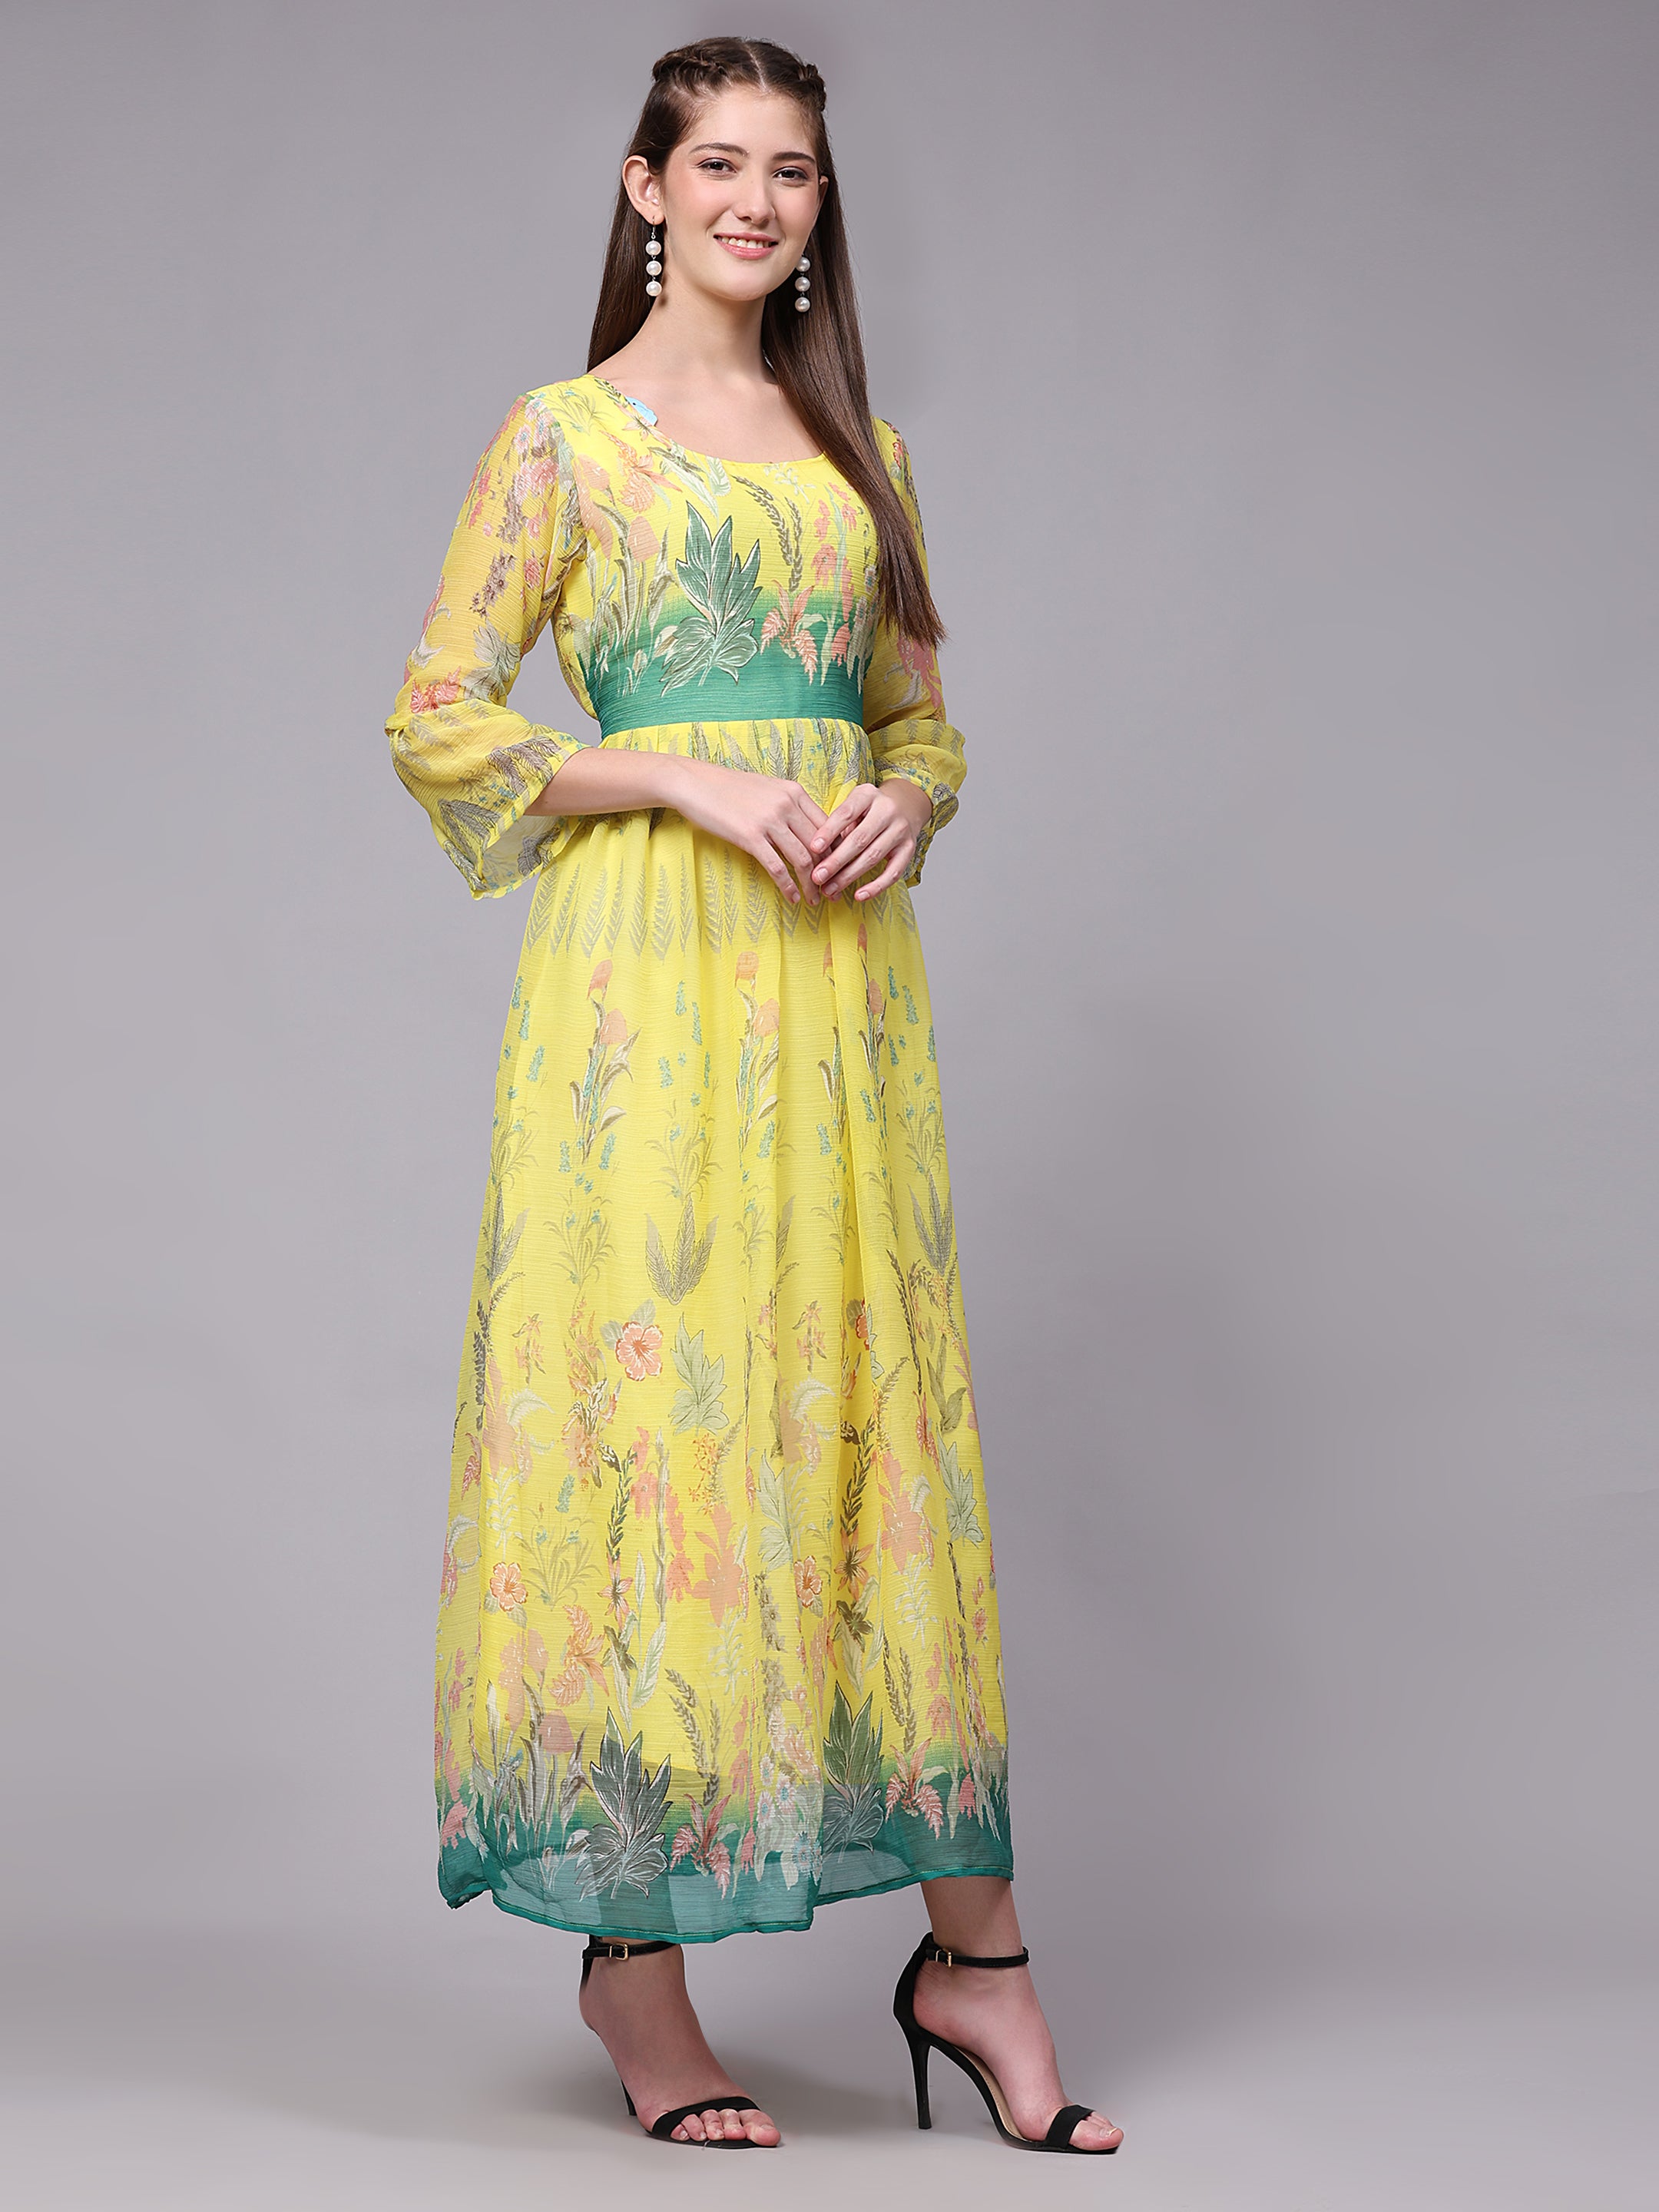 Blooming Elegance: Floral Printed Maxi Dress in Luxuriously Soft Chiffon